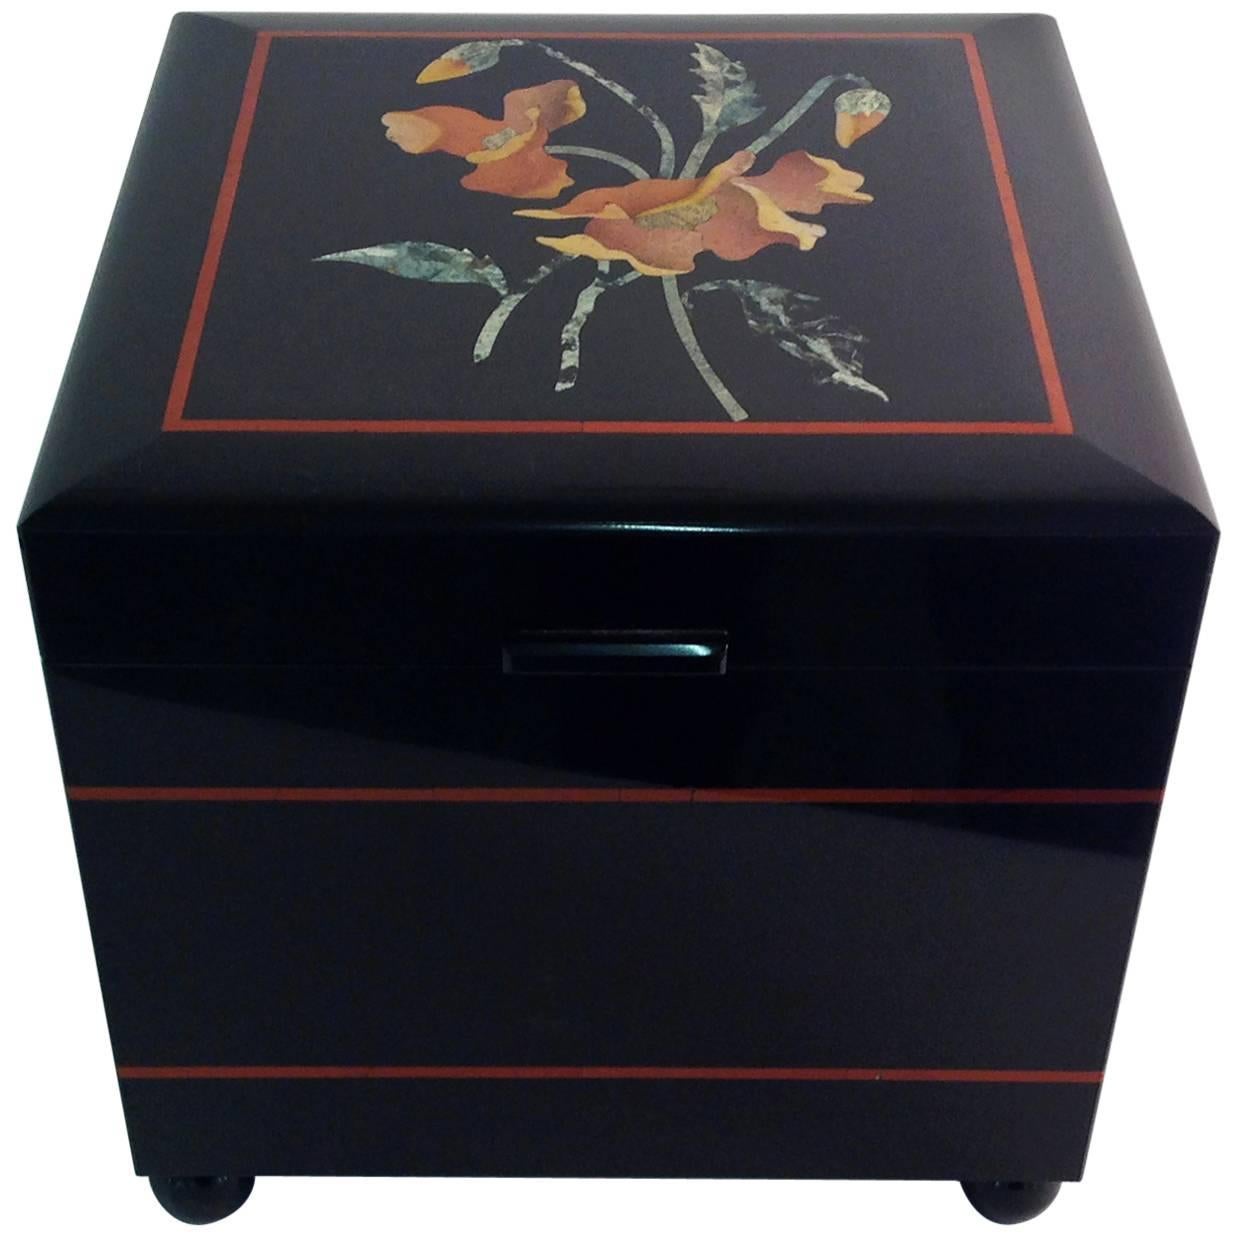 Beautiful Belgian Black Marble Floral Hinged Box, Florentine Handicraft, Italy For Sale